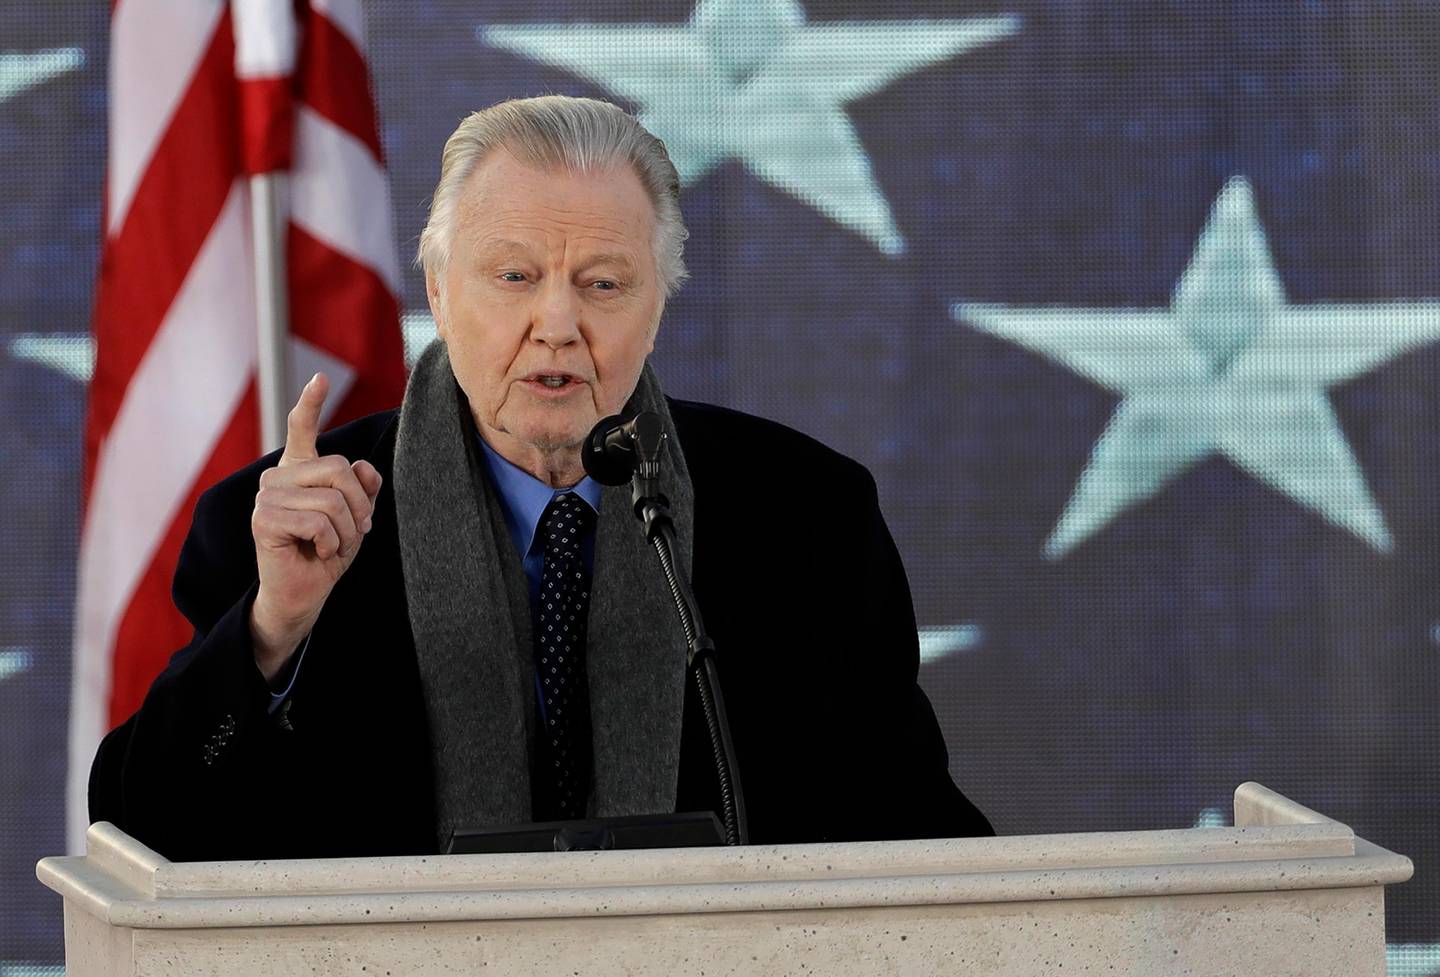 Actor Jon Voight speaks during a pre-Inaugural "Make America Great Again! Welcome Celebration" at the Lincoln Memorial in Washington, Thursday, Jan. 19, 2017. (AP Photo/David J. Phillip)